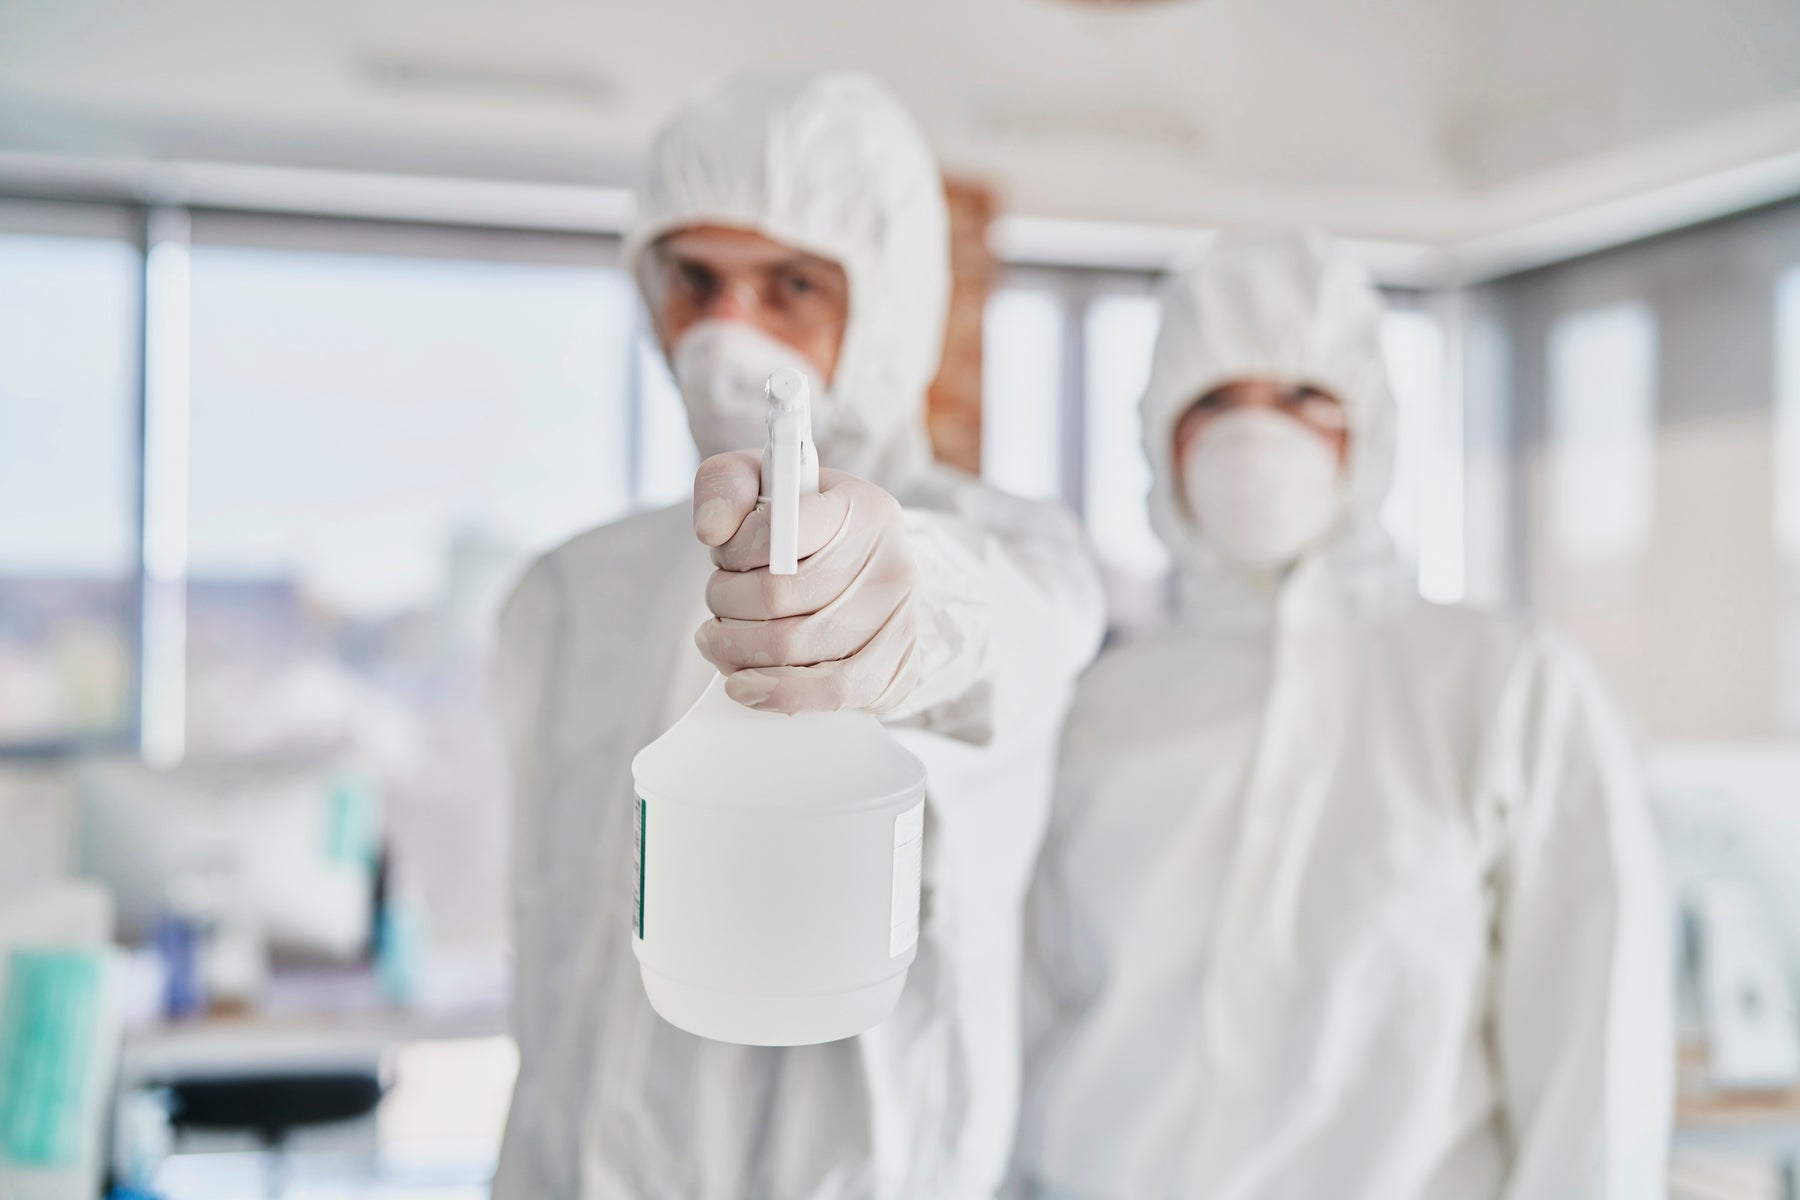 Registered EPA List of Disinfectants to Fight Against the COVID-19